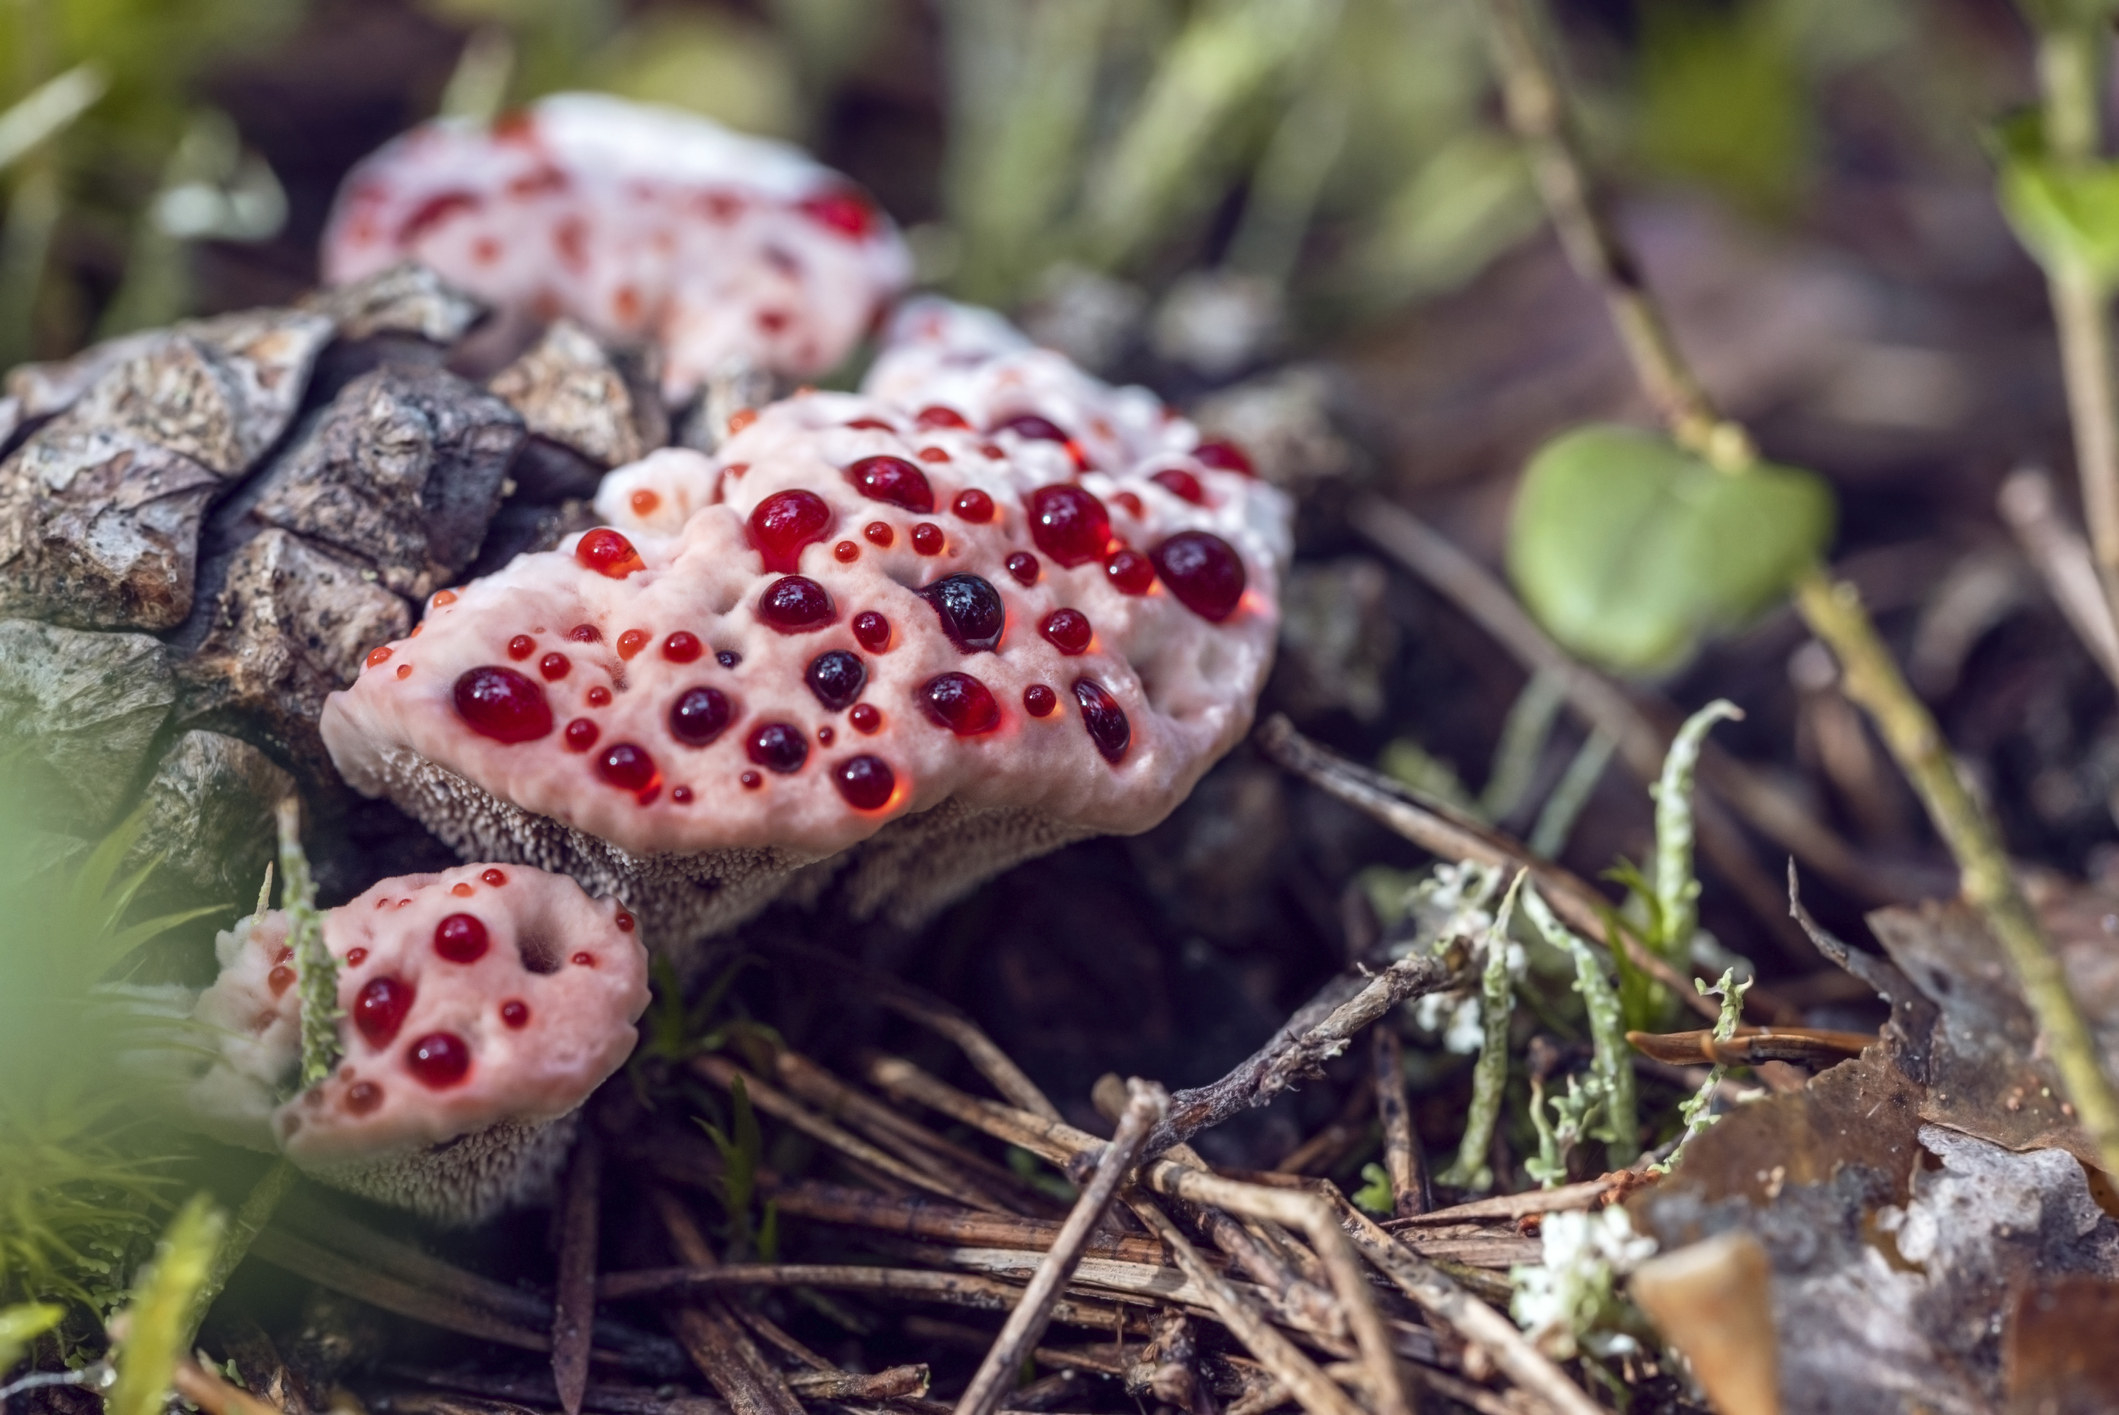 A fungus on the forest floor covered in droplets of what looks like blood